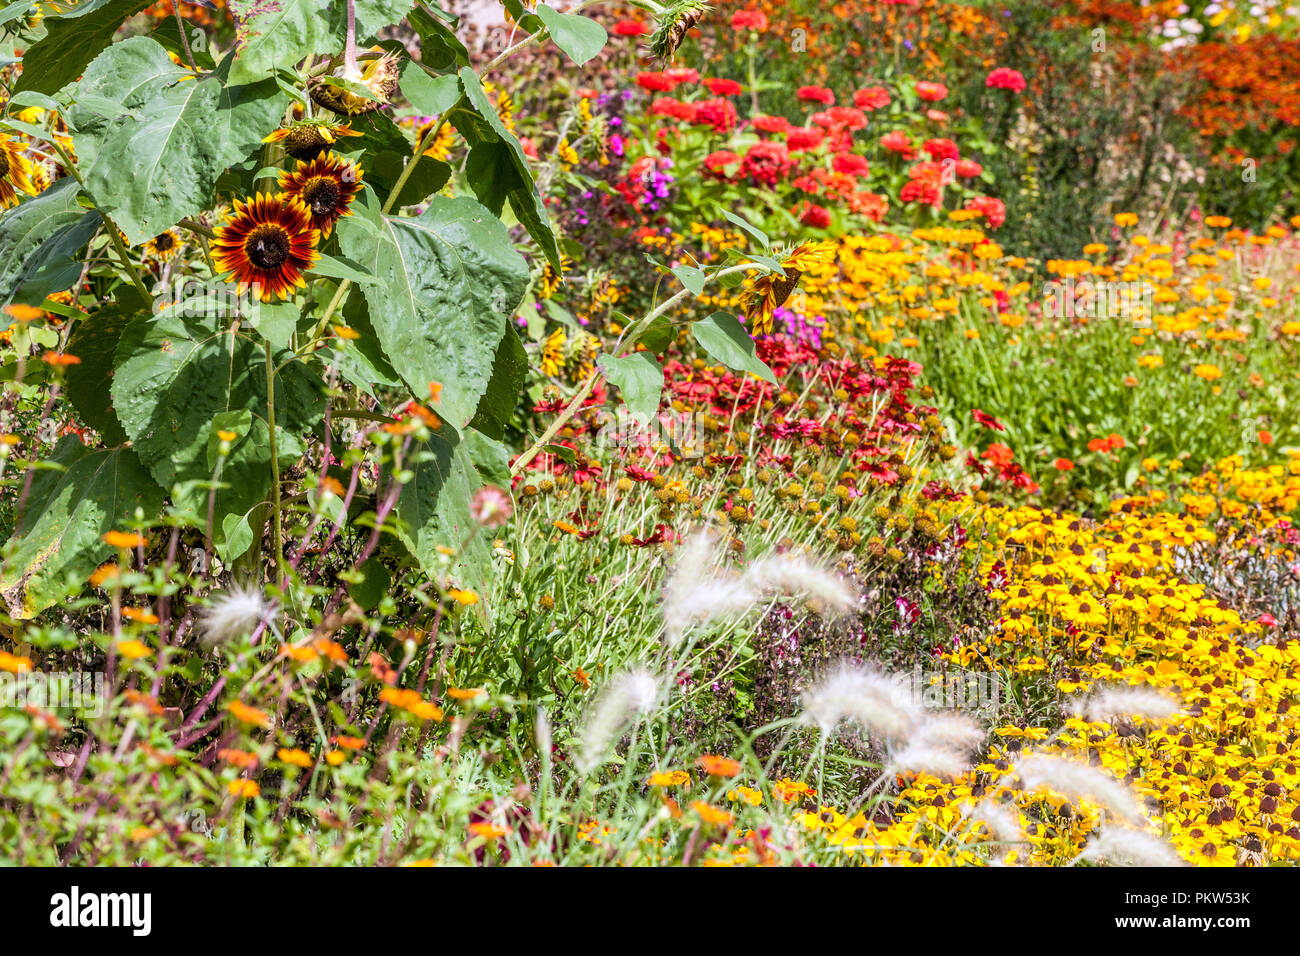 Colorful garden flowers, a summer flower bed in a cottage garden, Rudbeckia hirta Sonora Chine Astra Amaranth Sunflowers, planting combination Stock Photo